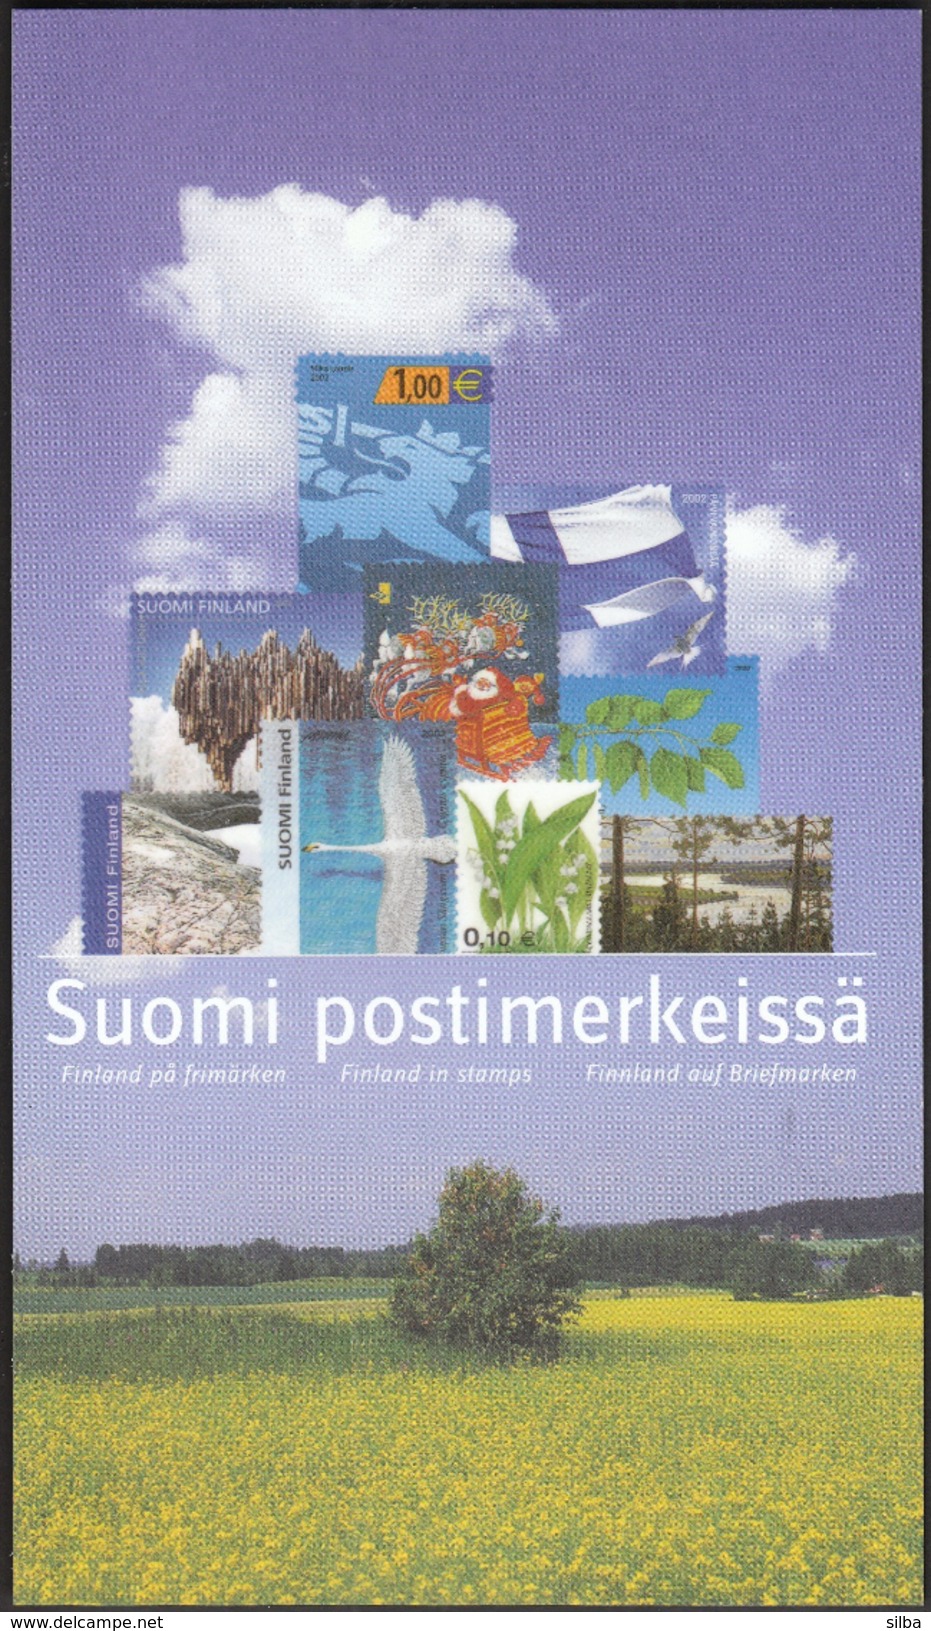 Finland in Stamps